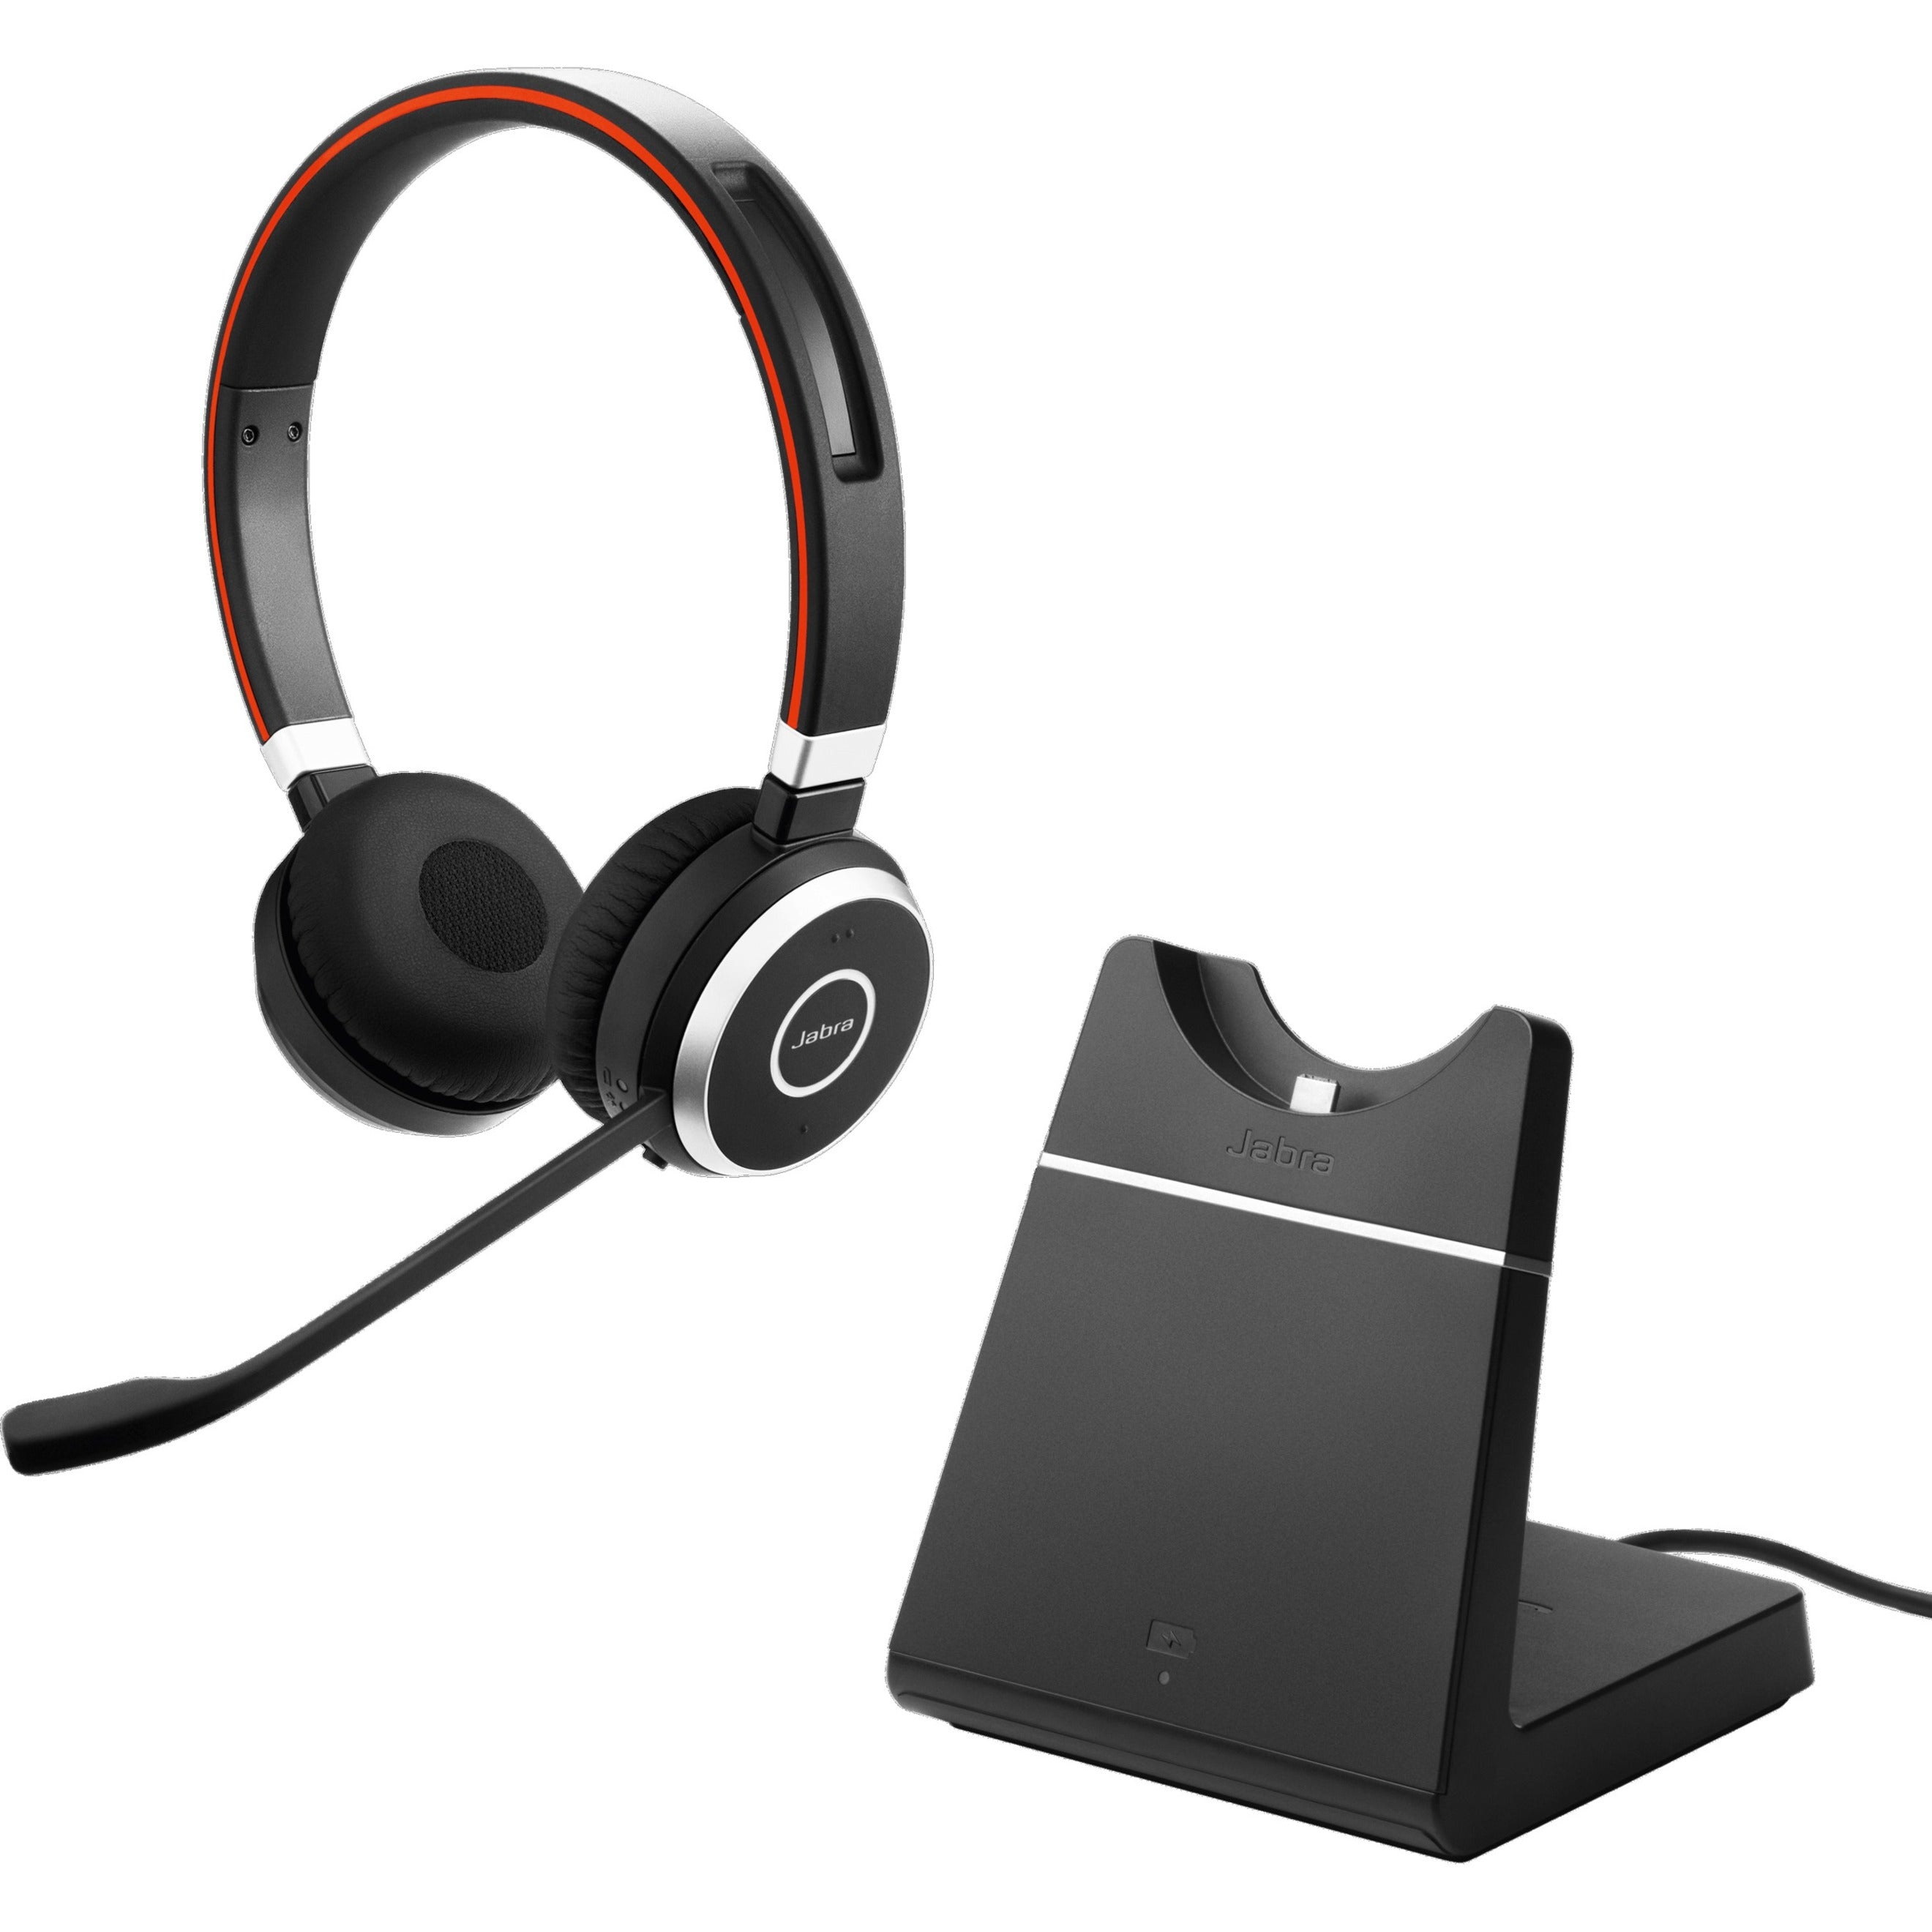 Jabra 6599-823-399 Evolve 65 With Charging Stand MS Stereo, Wireless Bluetooth Headset